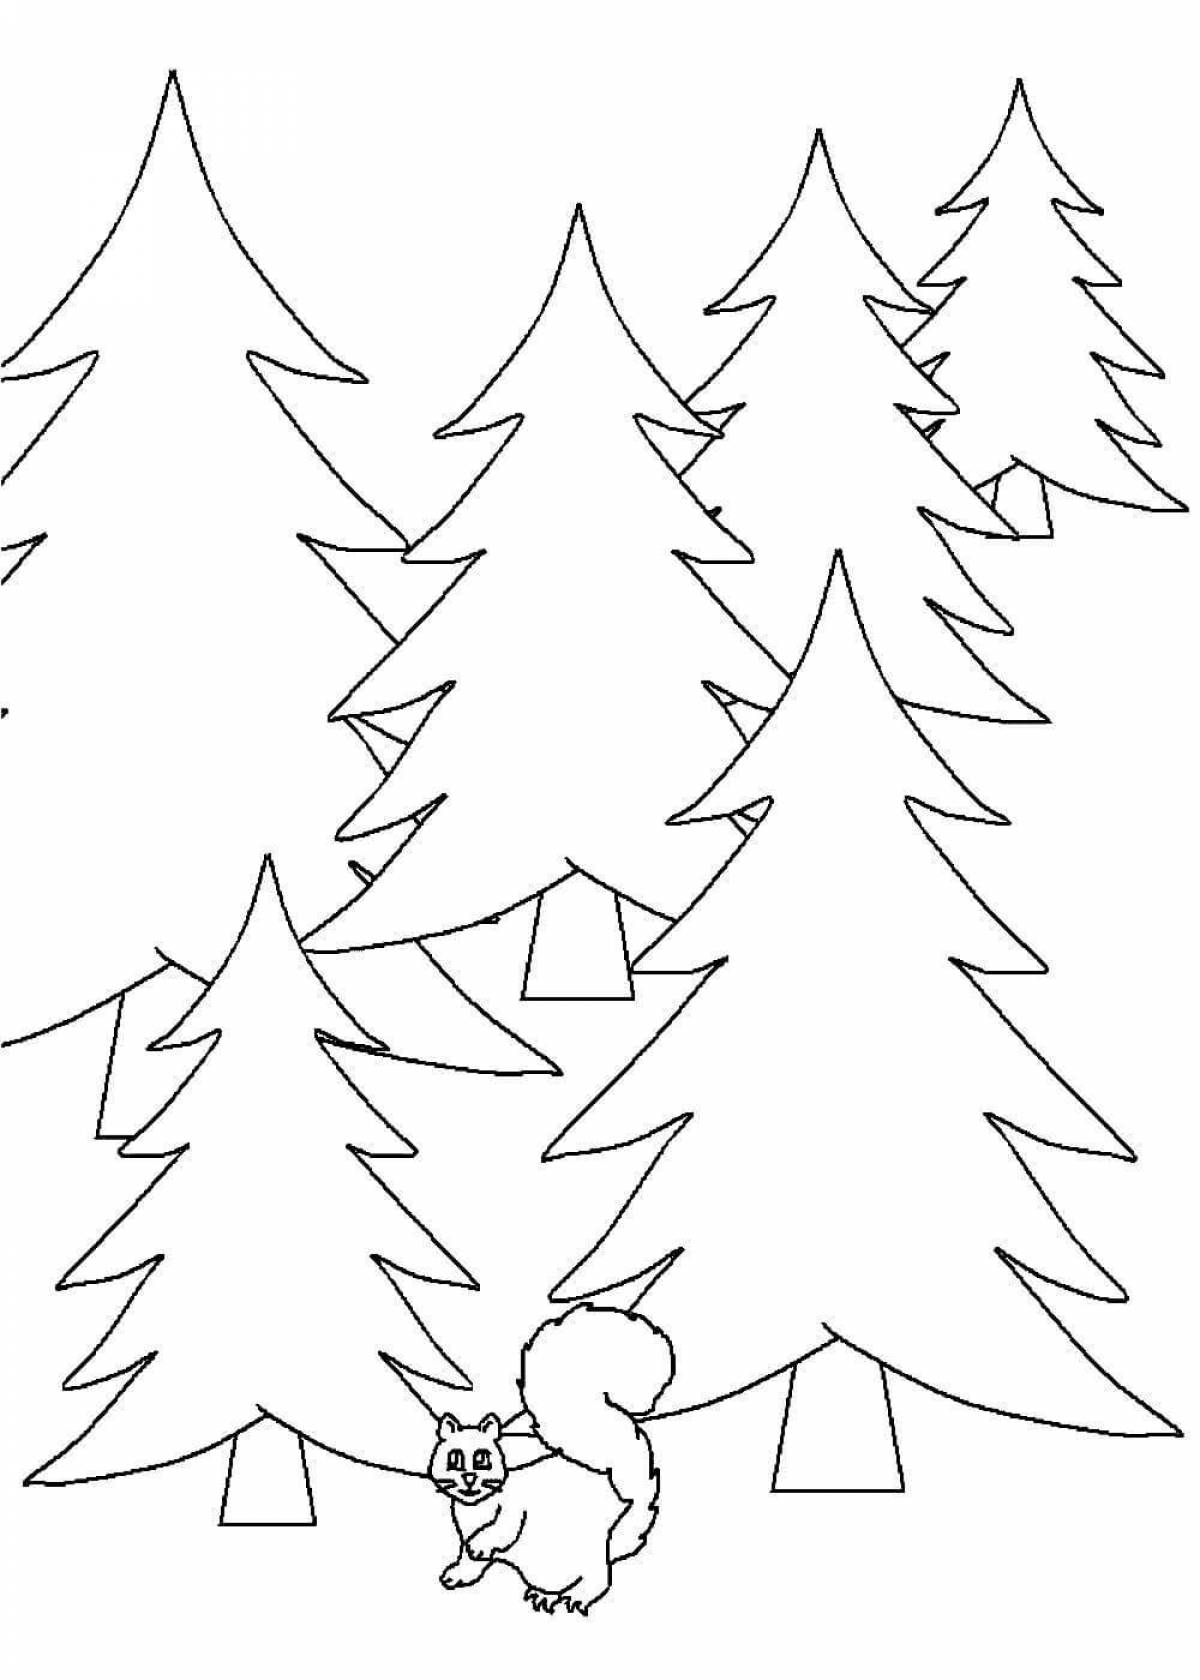 Coloring book dreamy winter forest for kids